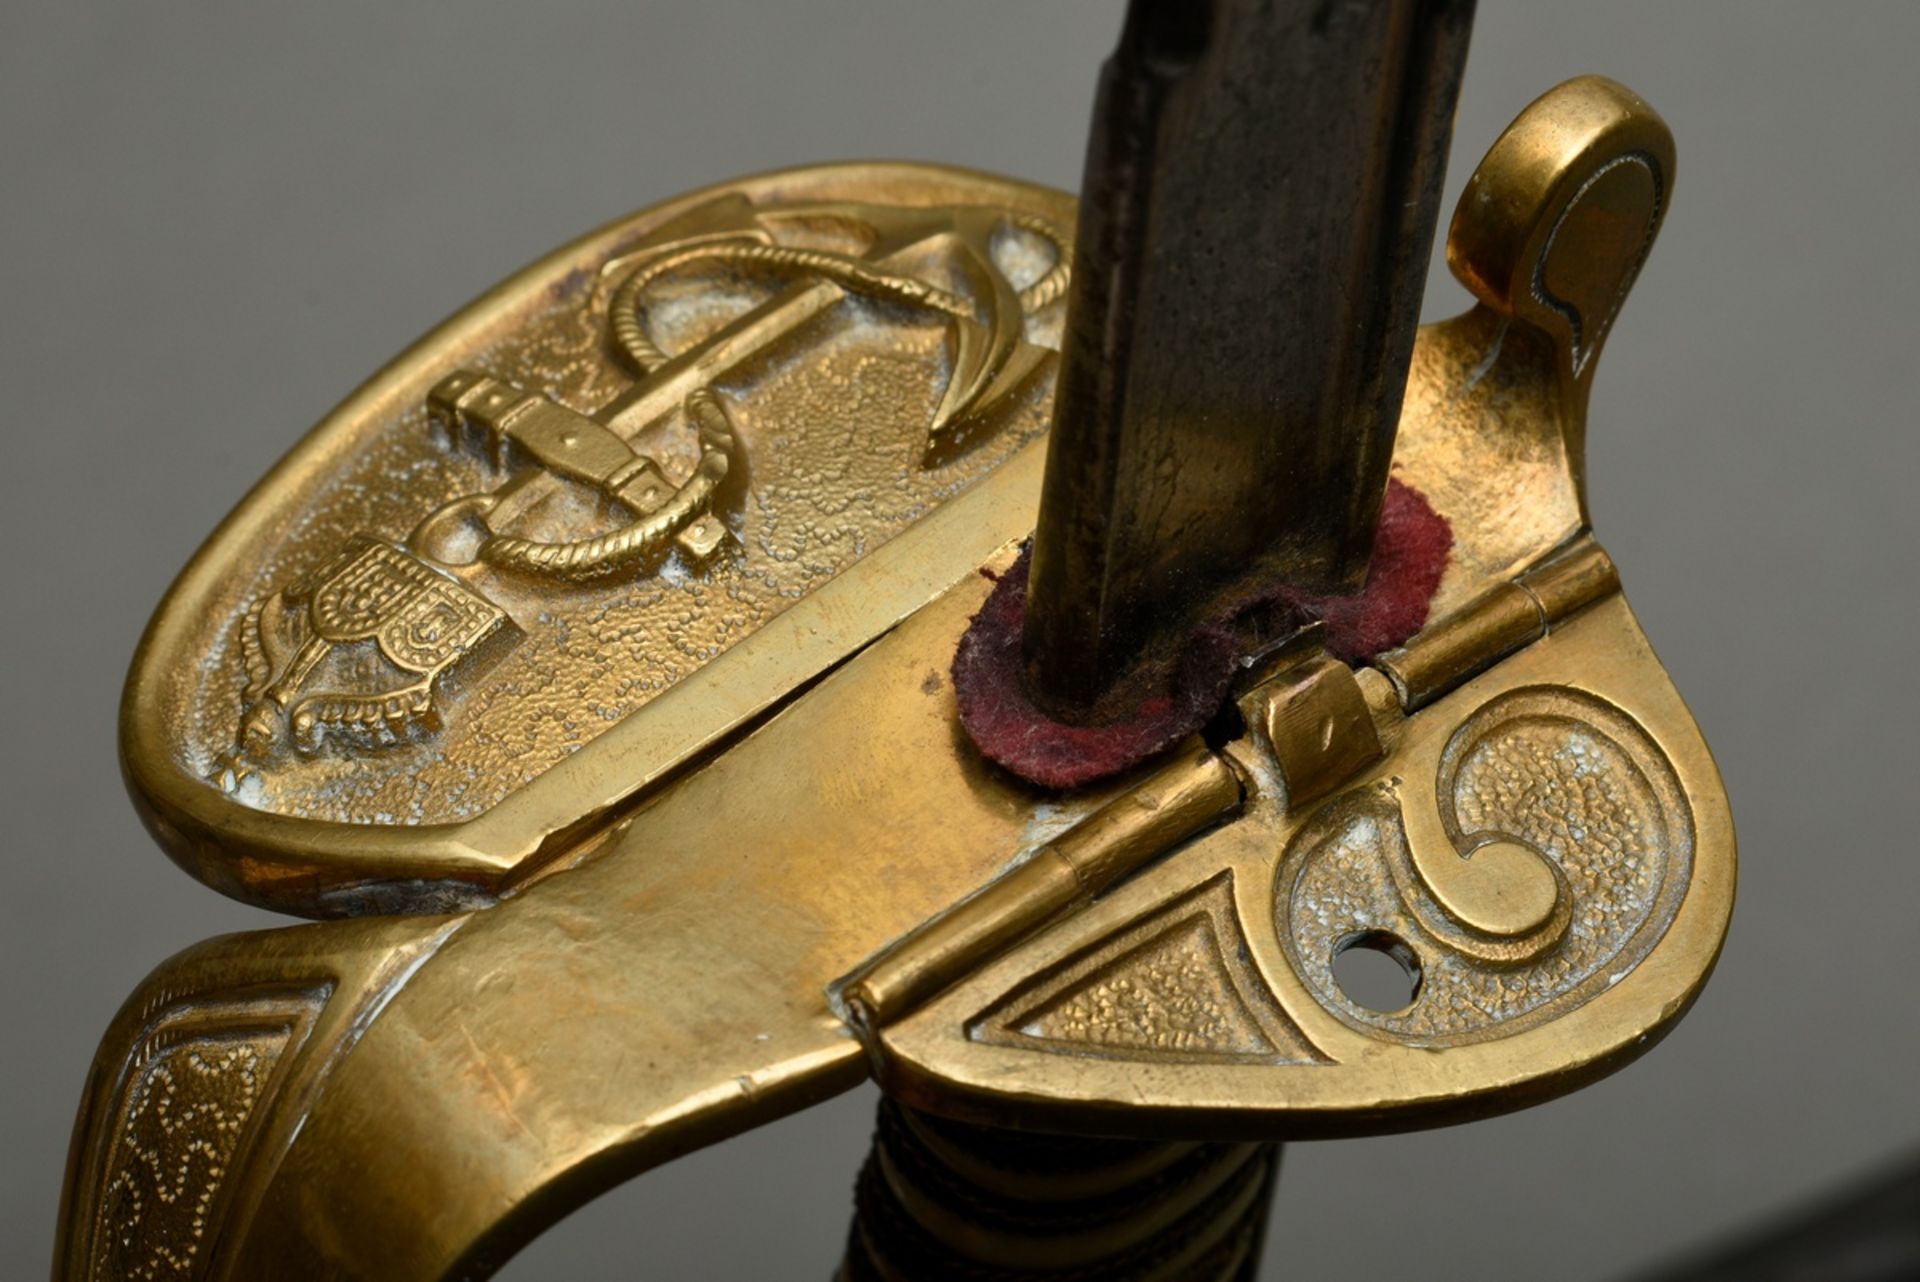 Prussian lion head sabre for the navy, bright damascus blade, maker's mark "W.K.&C." and two marks, - Image 15 of 17